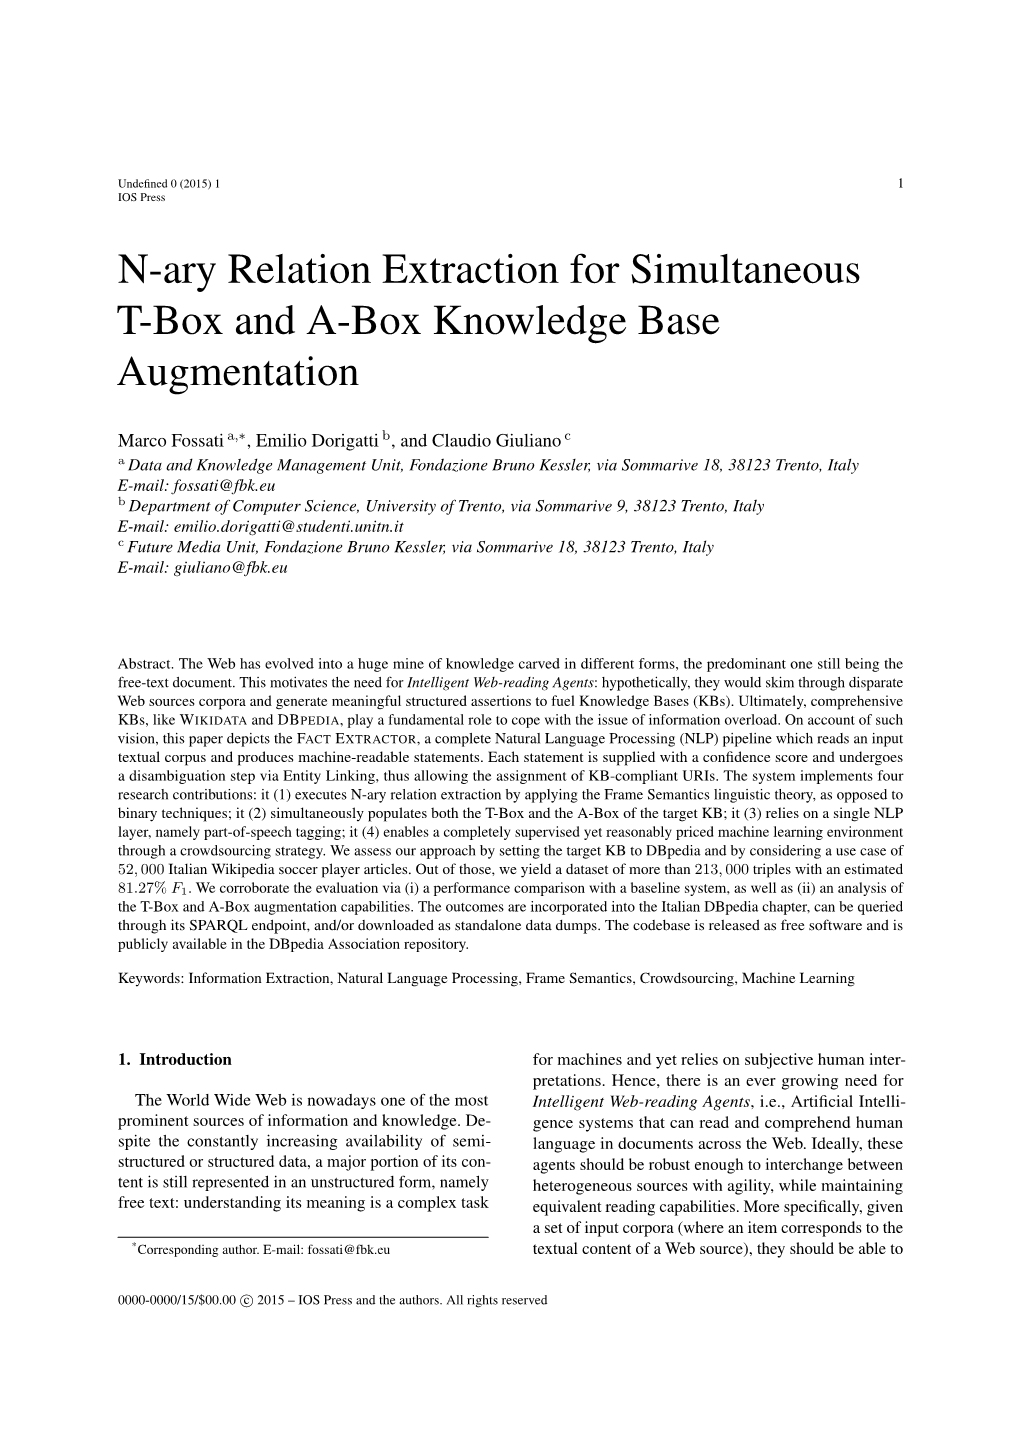 N-Ary Relation Extraction for Simultaneous T-Box and A-Box Knowledge Base Augmentation